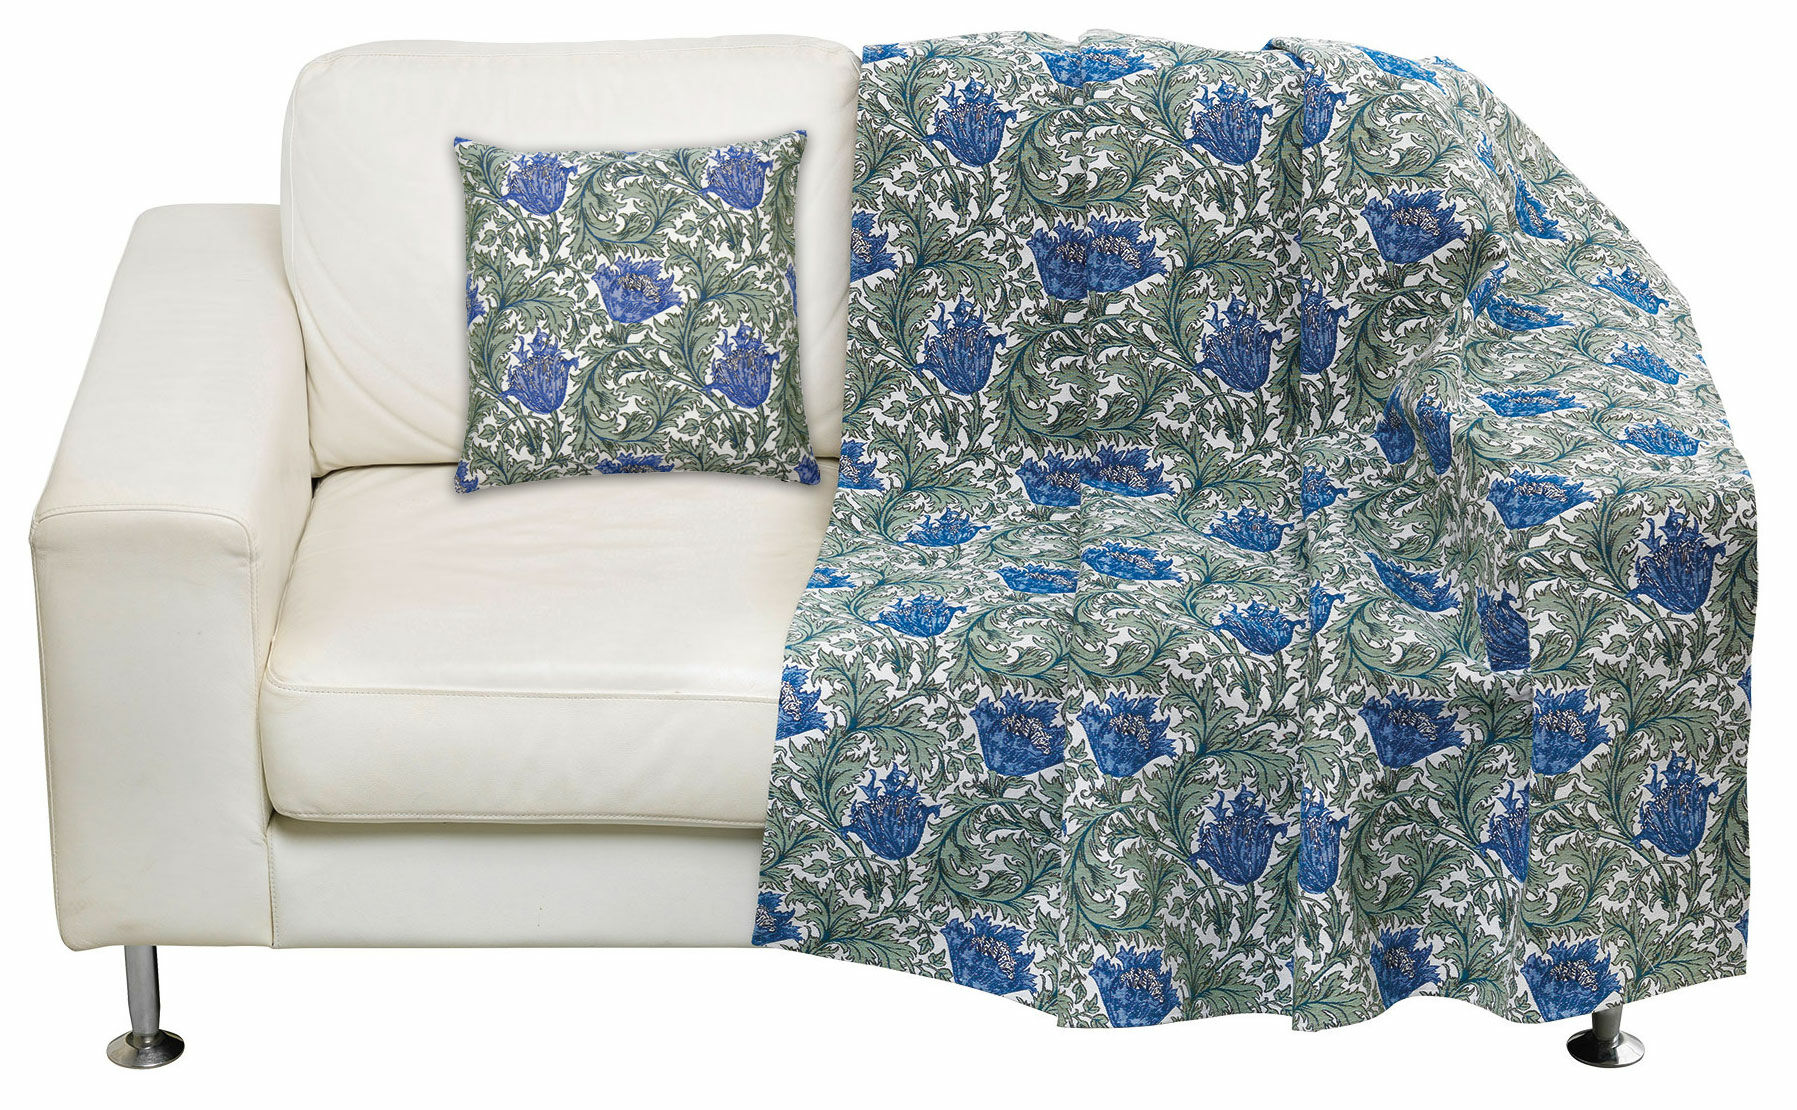 Set of throw and cushion cover "Anemone" - after William Morris